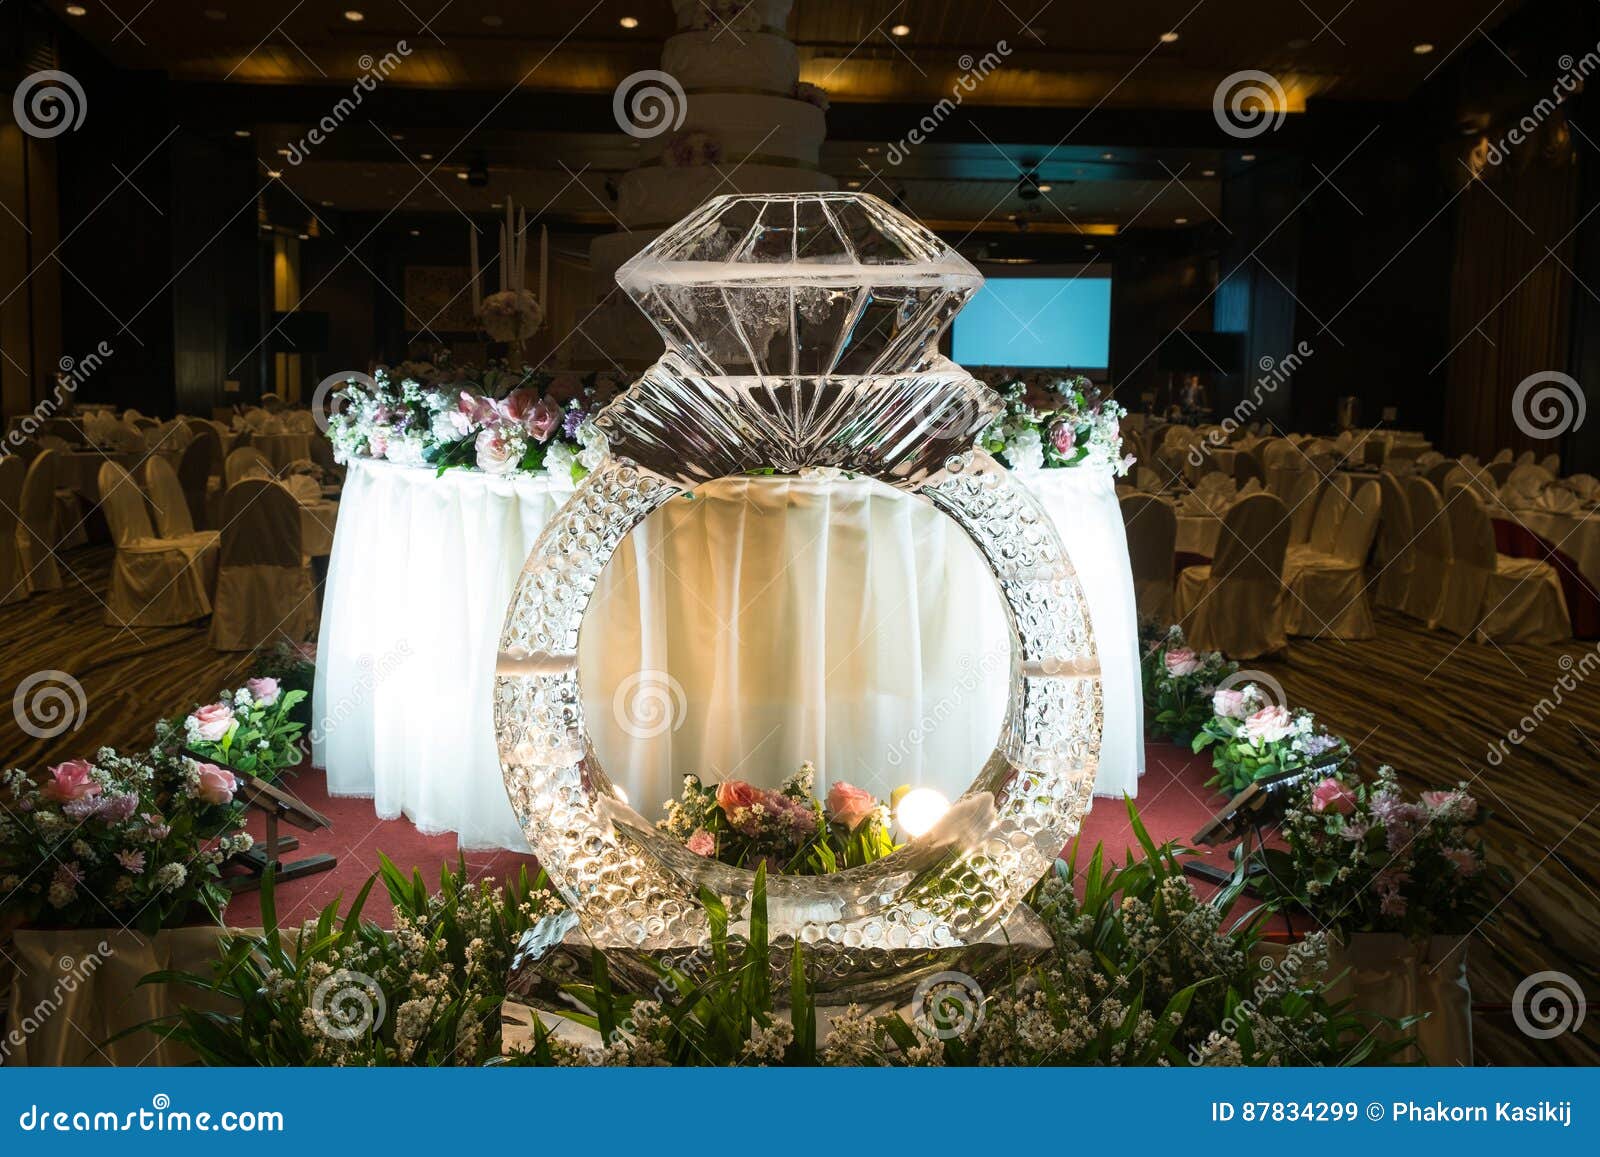 Best Ring Ceremony Decoration images | Simple stage decorations, Stage  decorations, Desi wedding decor